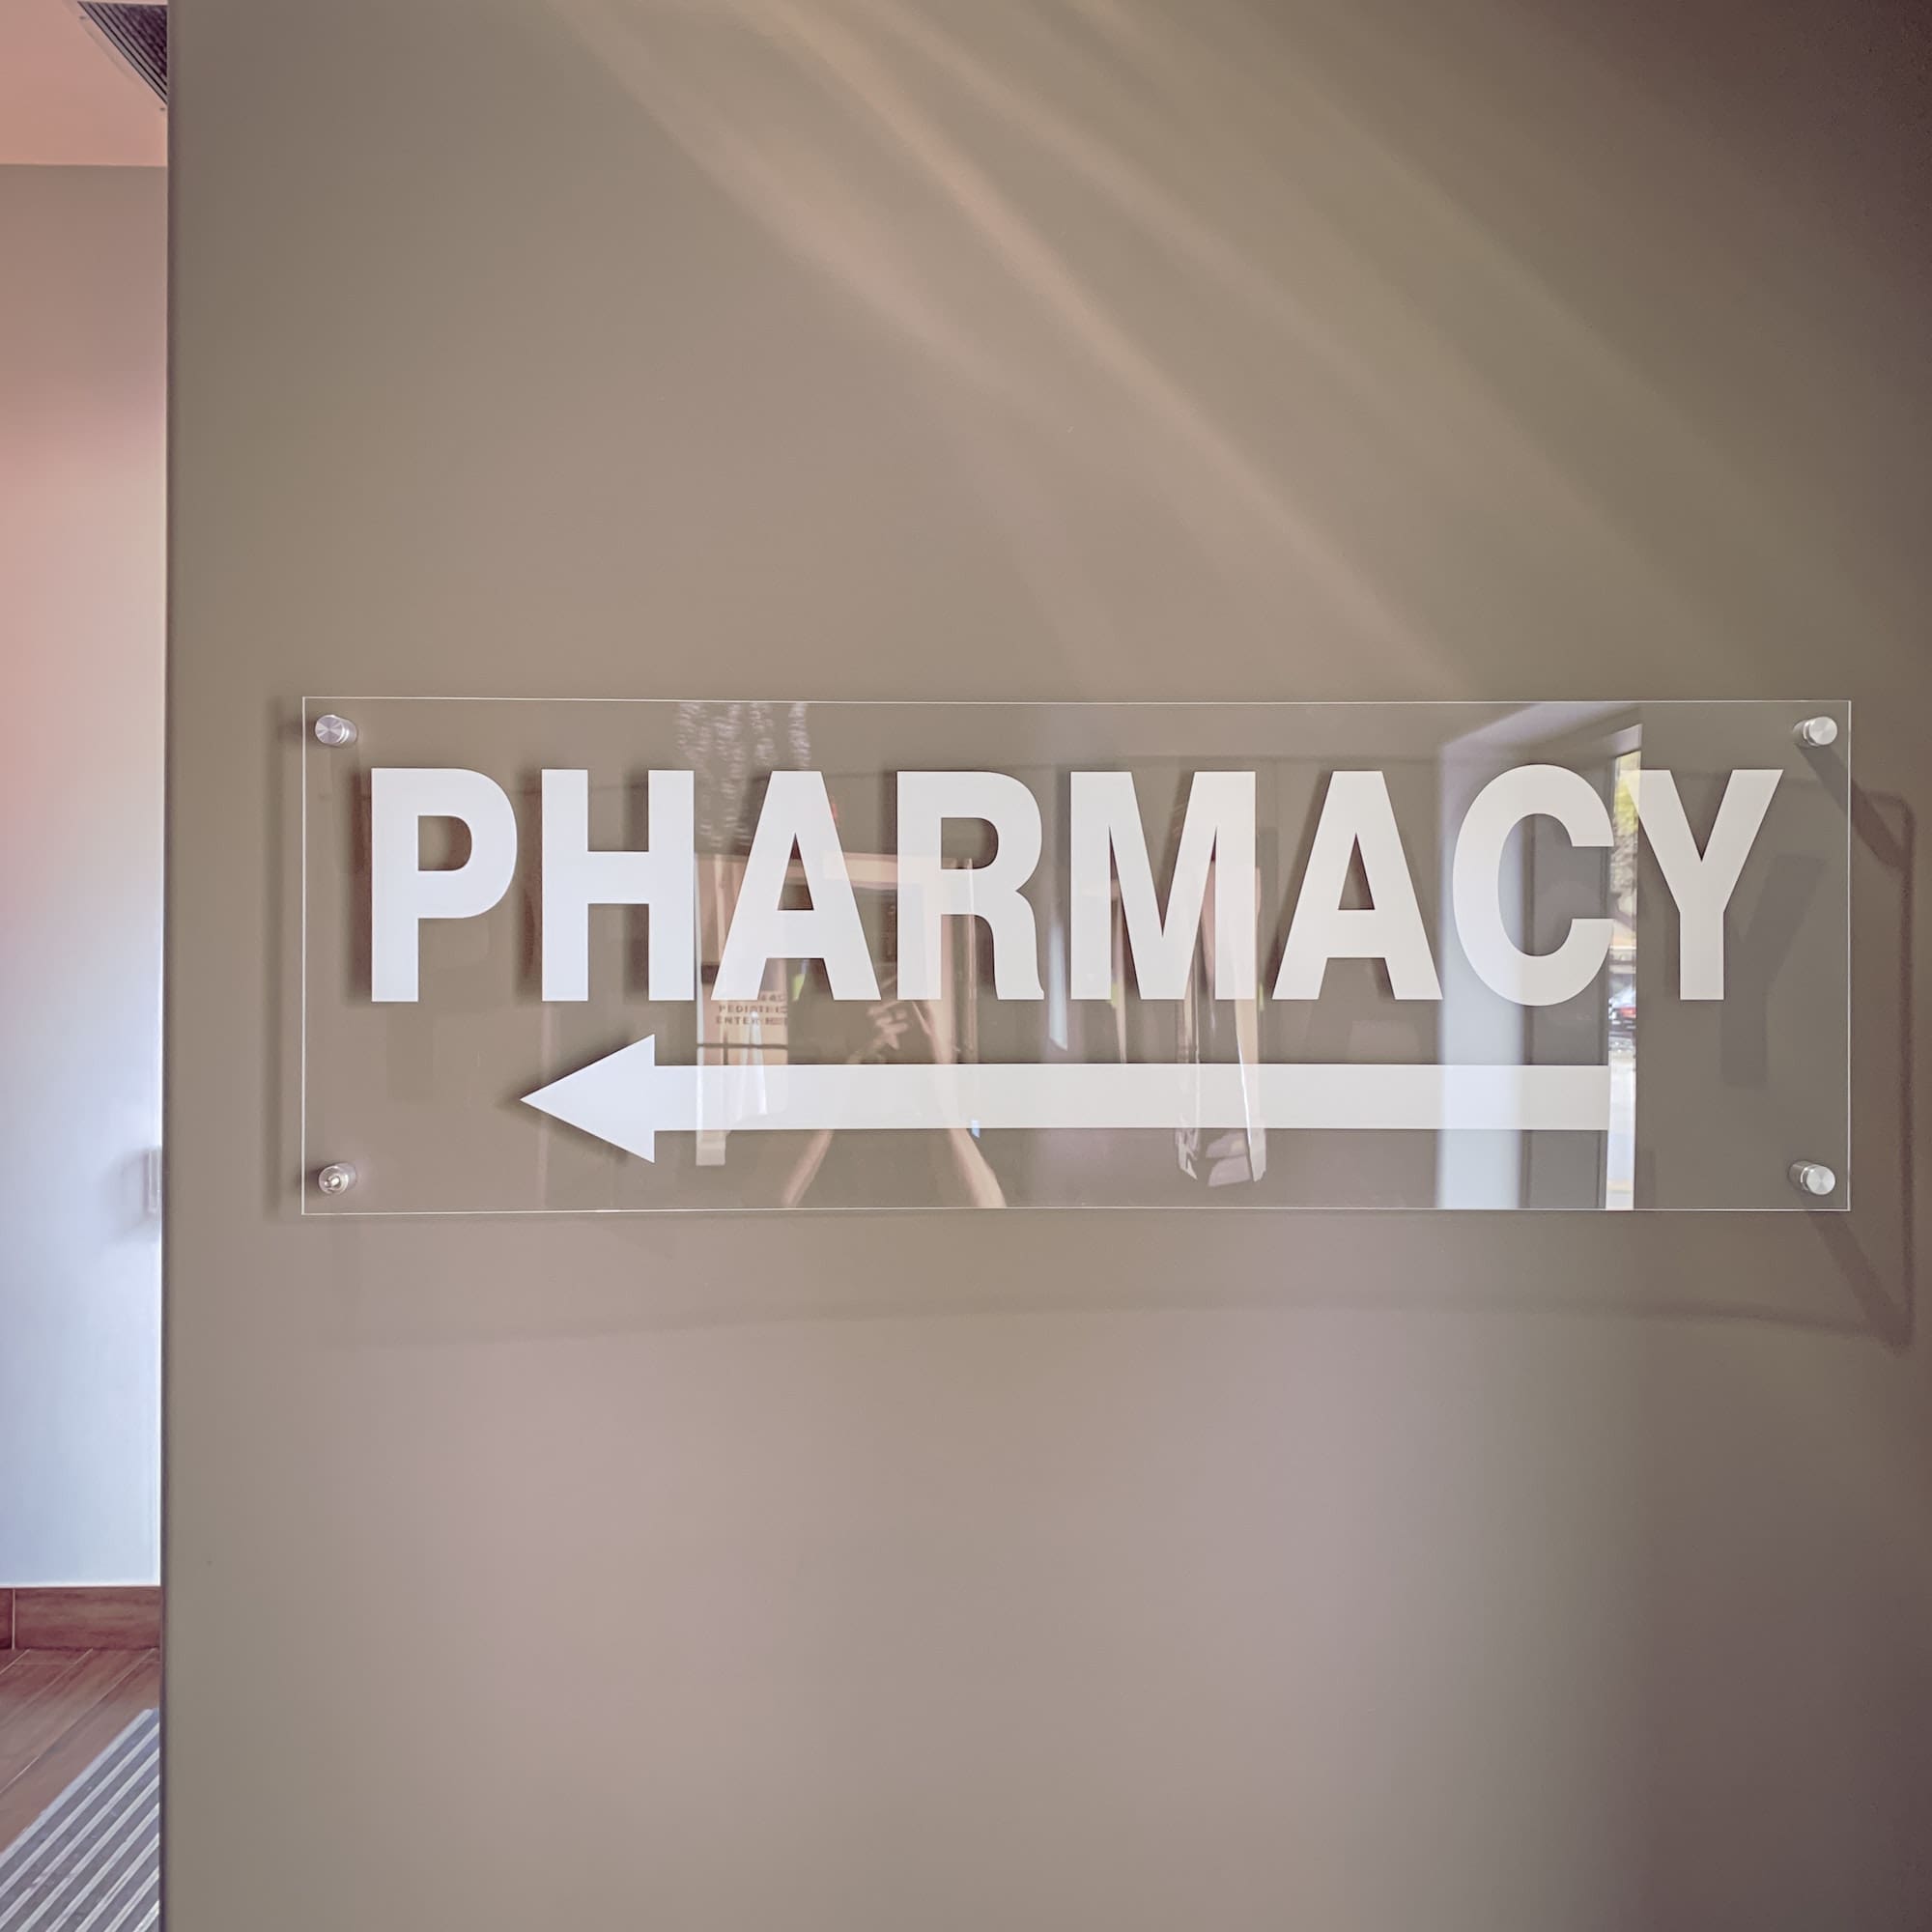 Pharmacy sign in the building